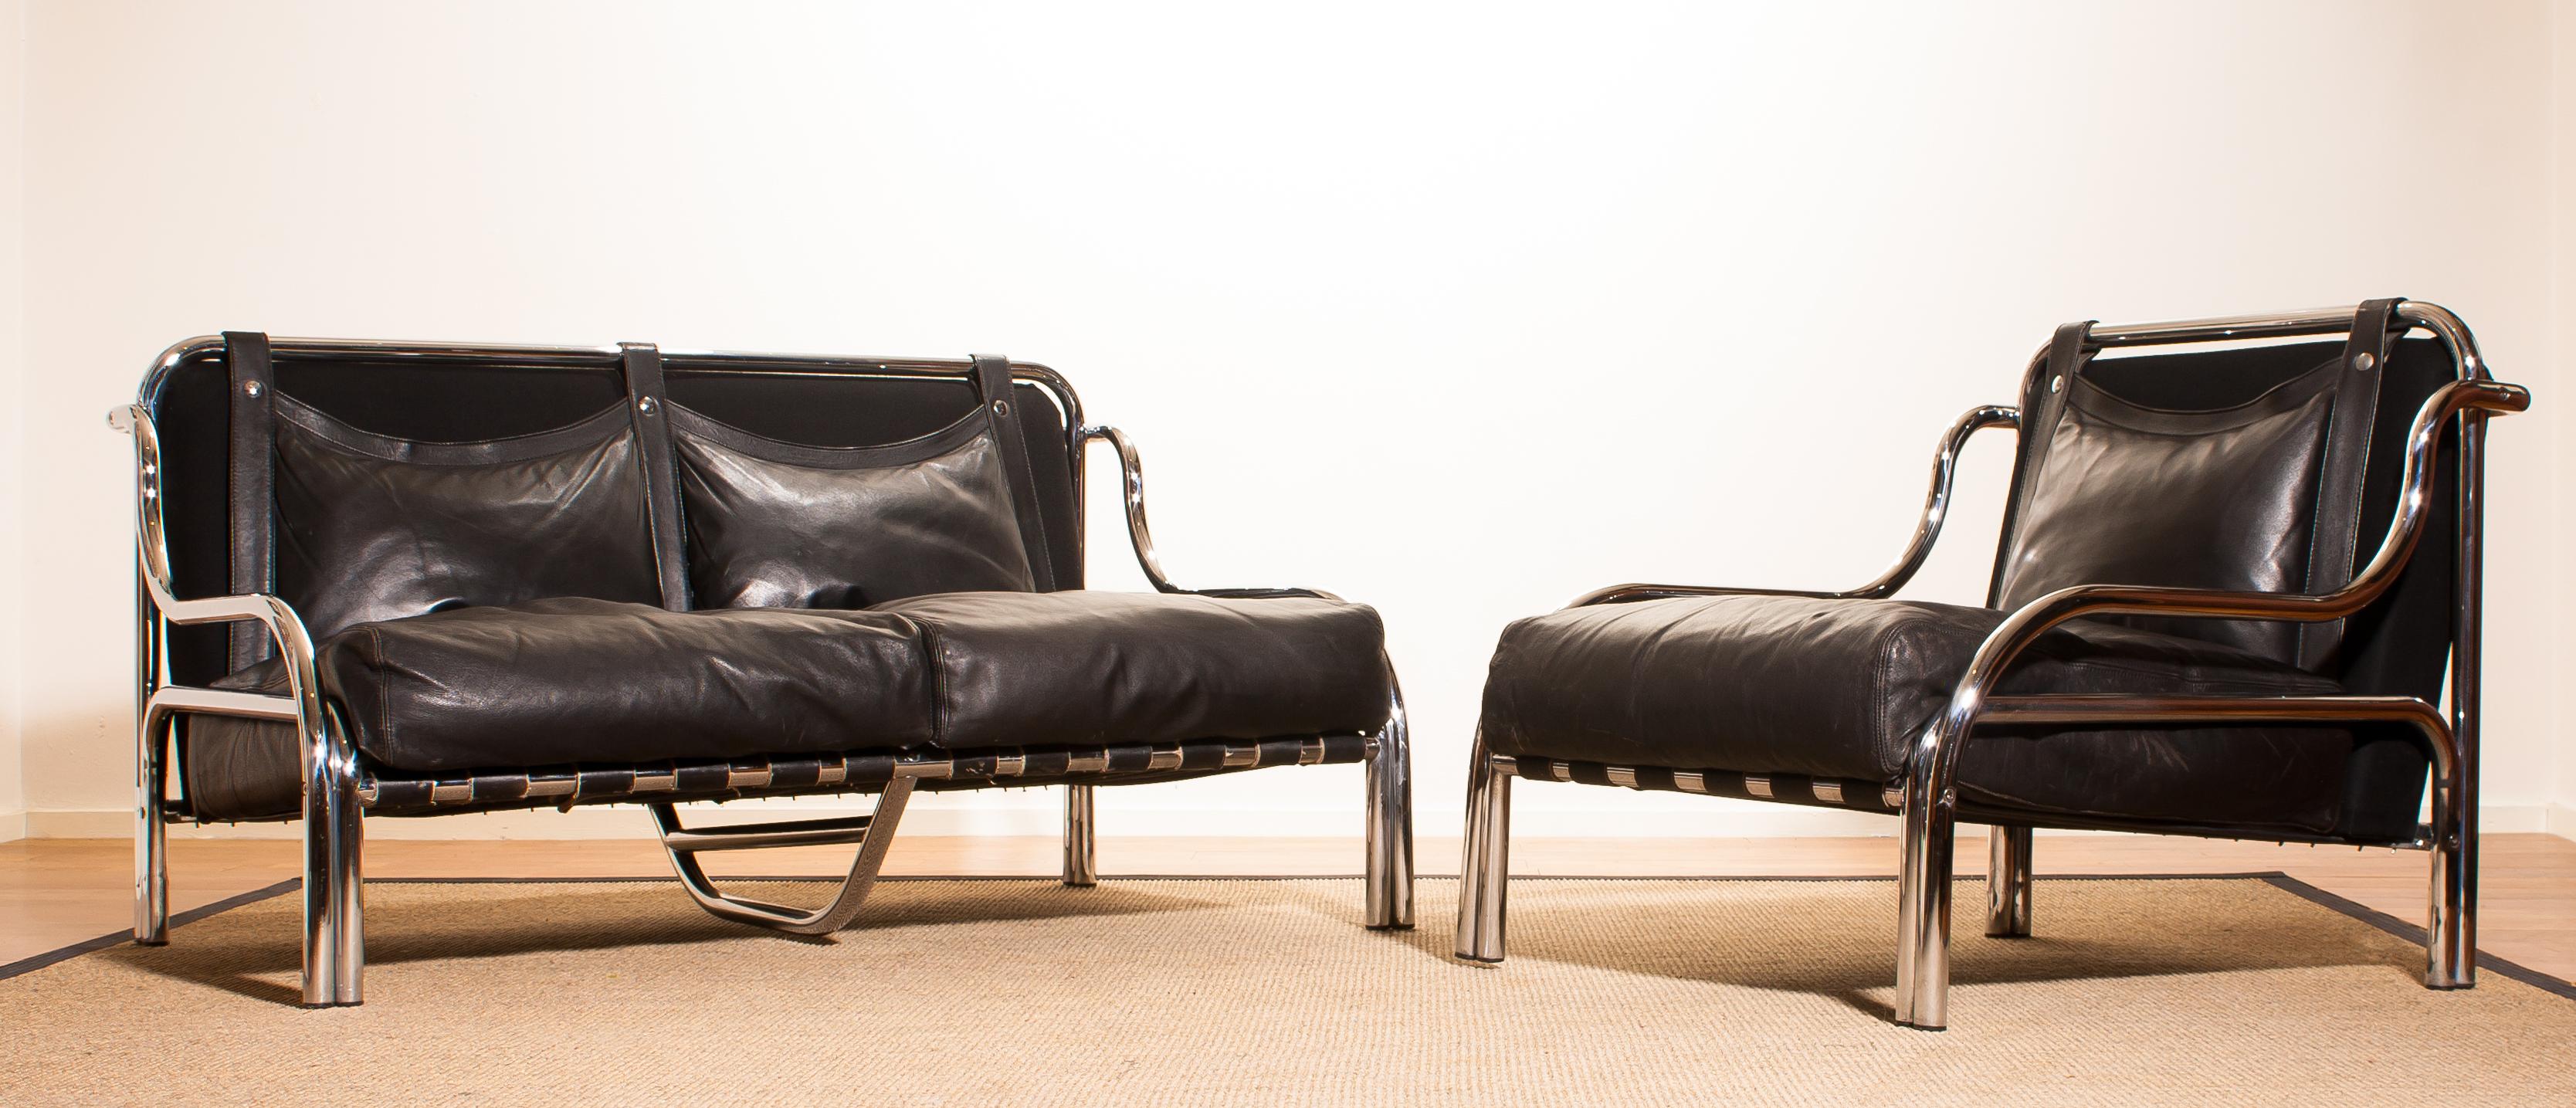 Mid-20th Century 1960s, Leather and Chrome Lounge Sofa and Chair by Gae Aulenti for Poltronova